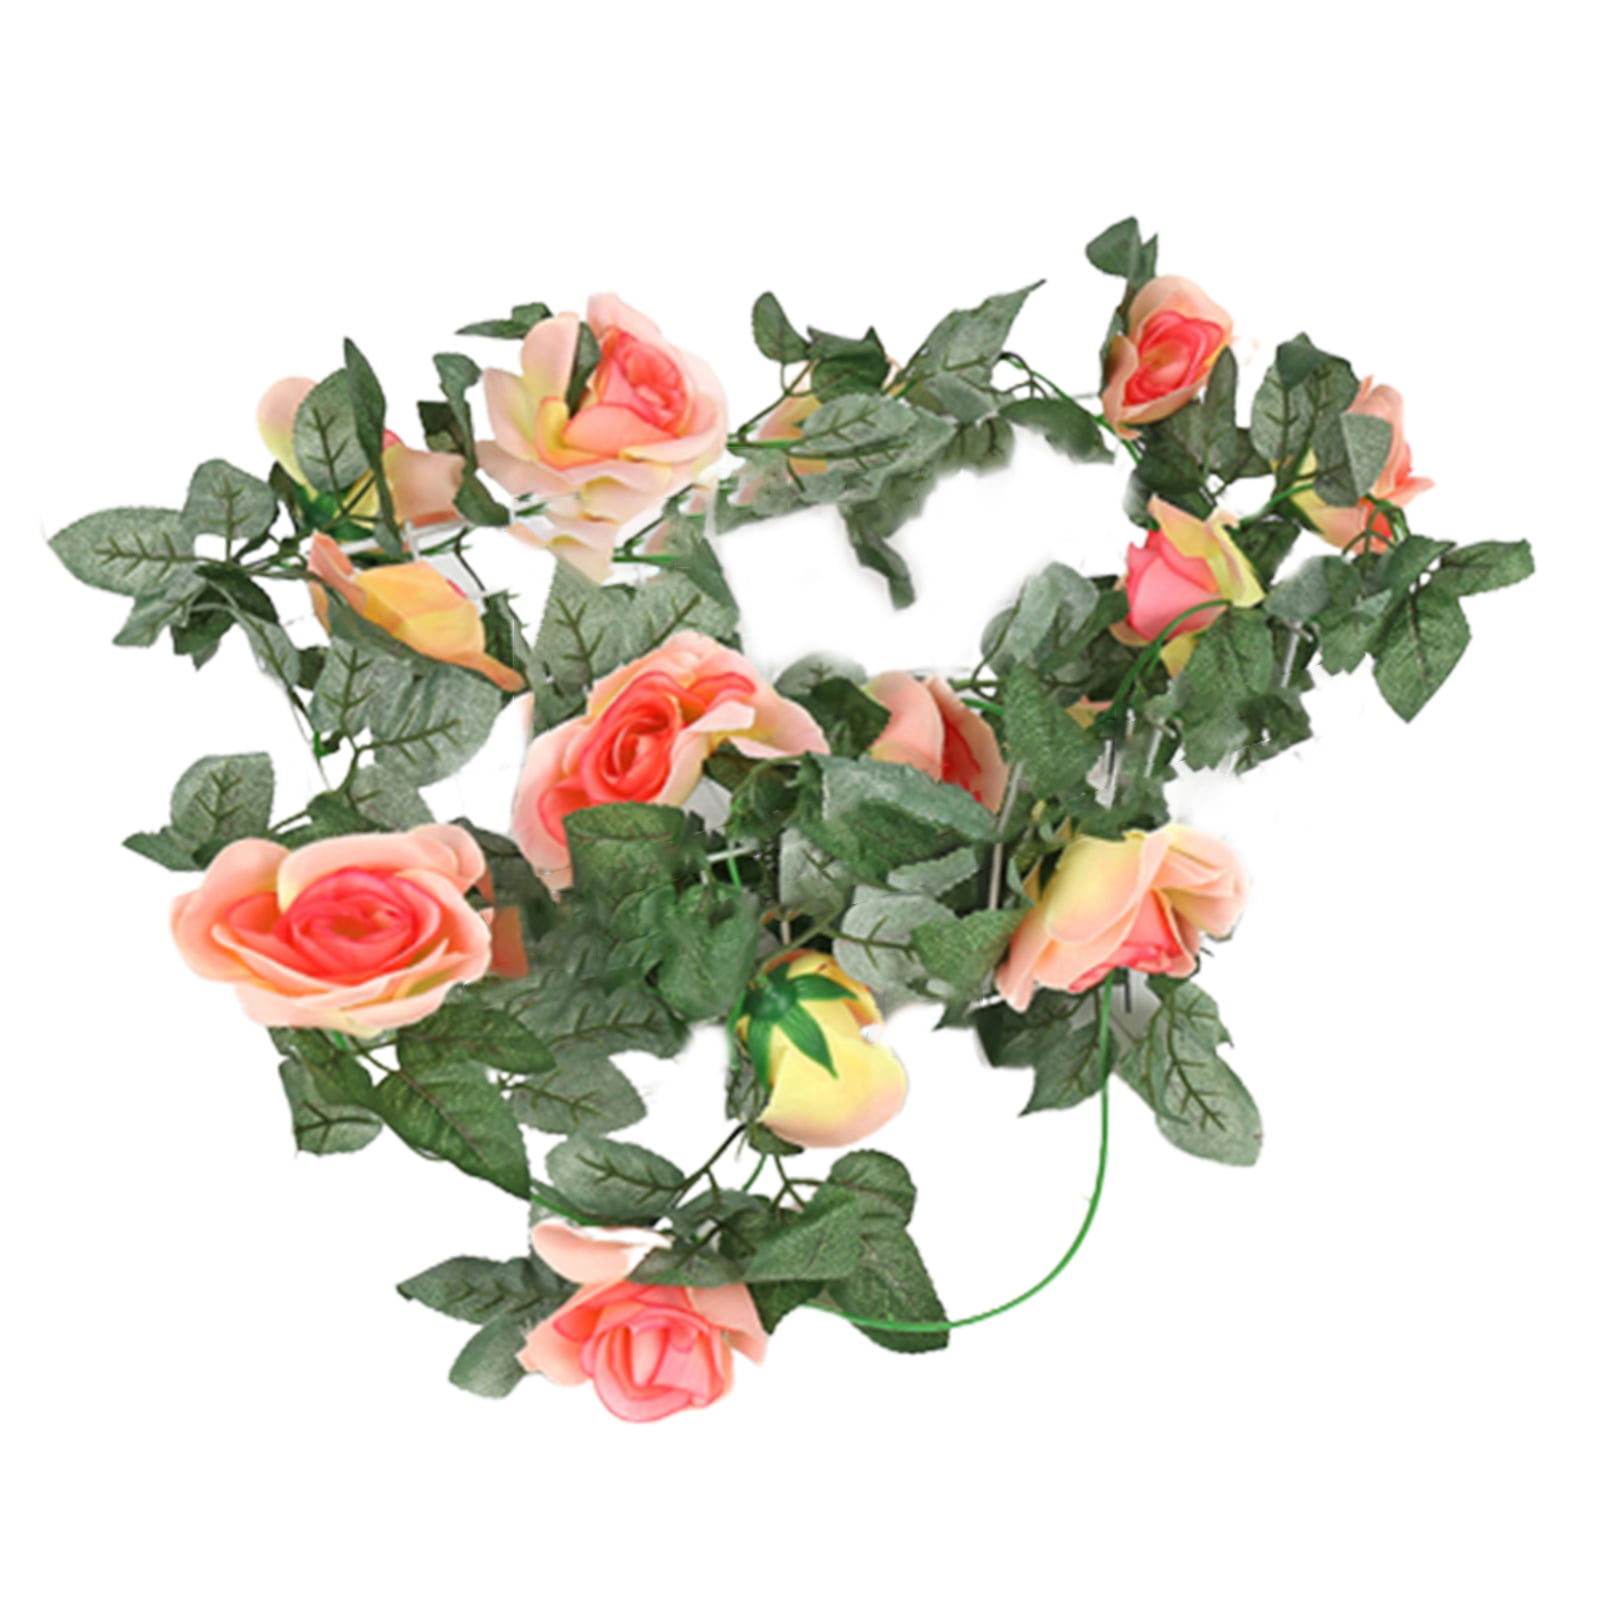 Details about   Artificial Plastic Rose With Elegant Box Gift Idea Flower Heads Wedding Supplies 